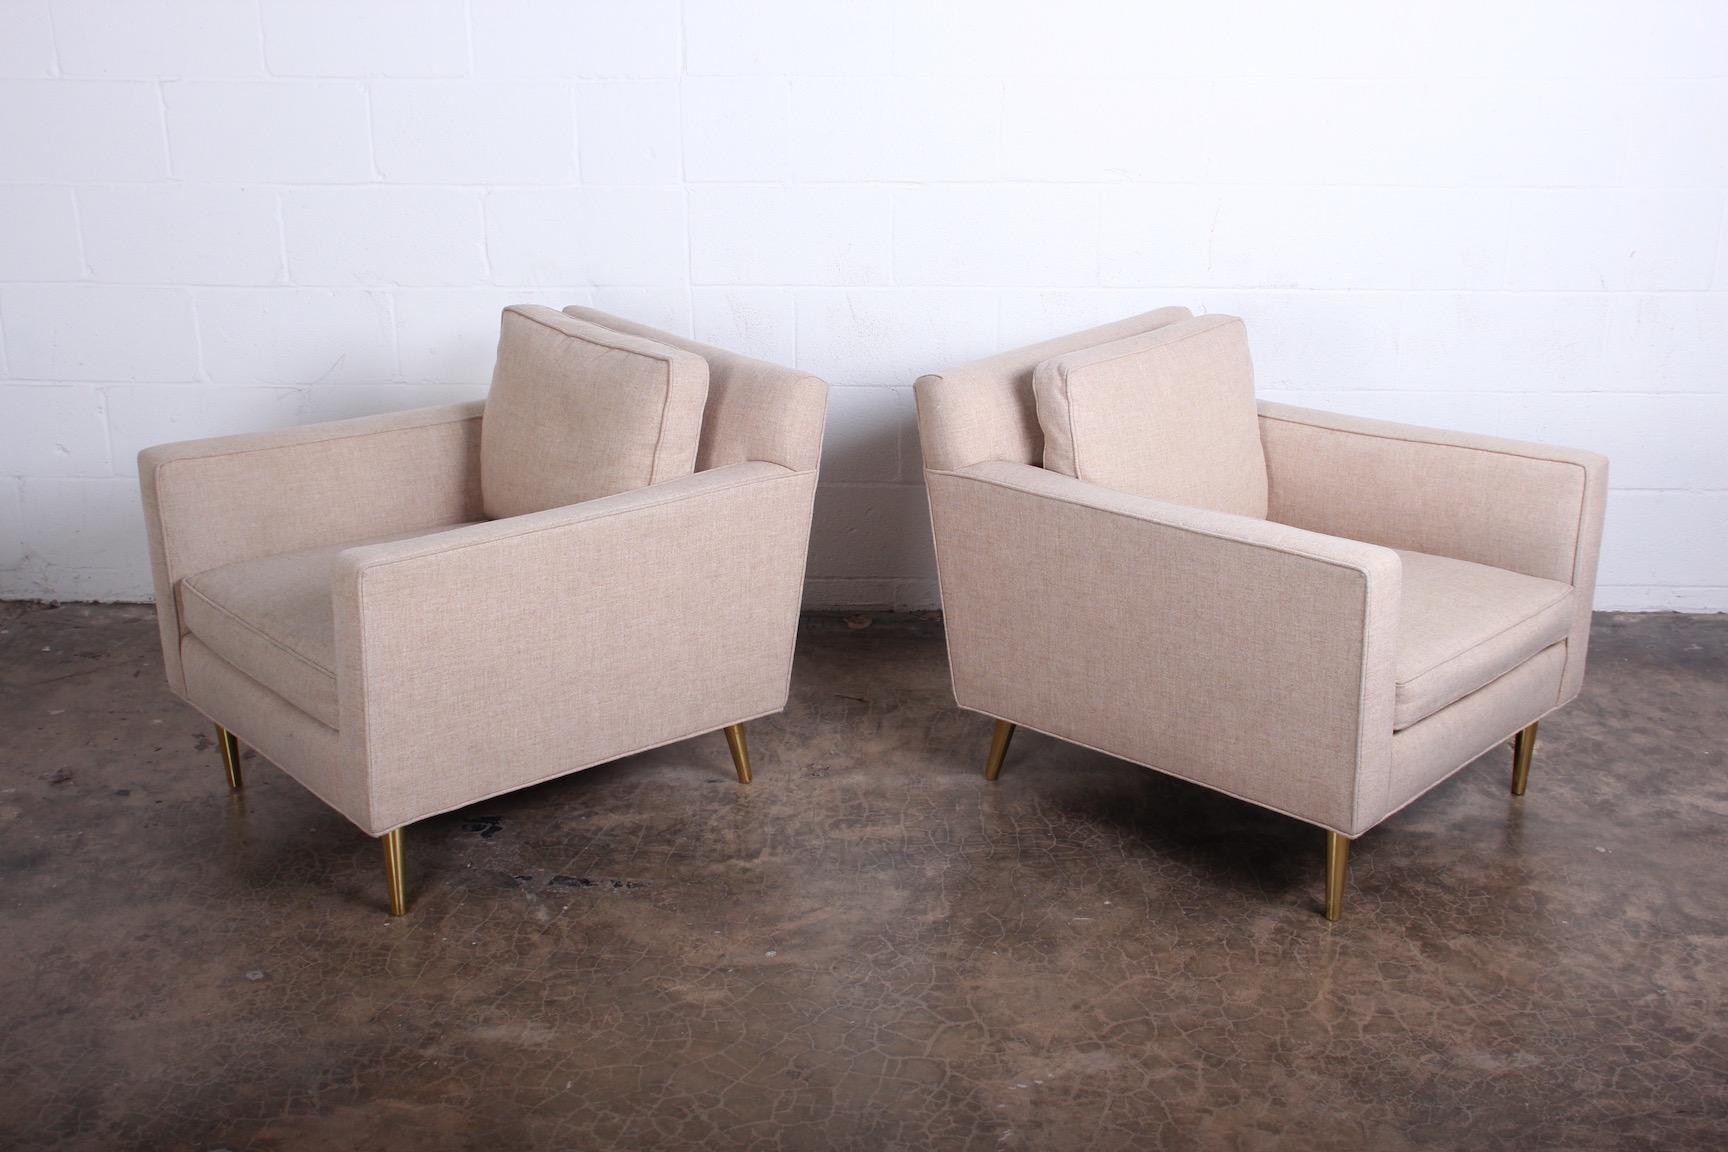 A pair of 4872A lounge chairs with brass legs. Designed in 1948 by Edward Wormley for Dunbar.